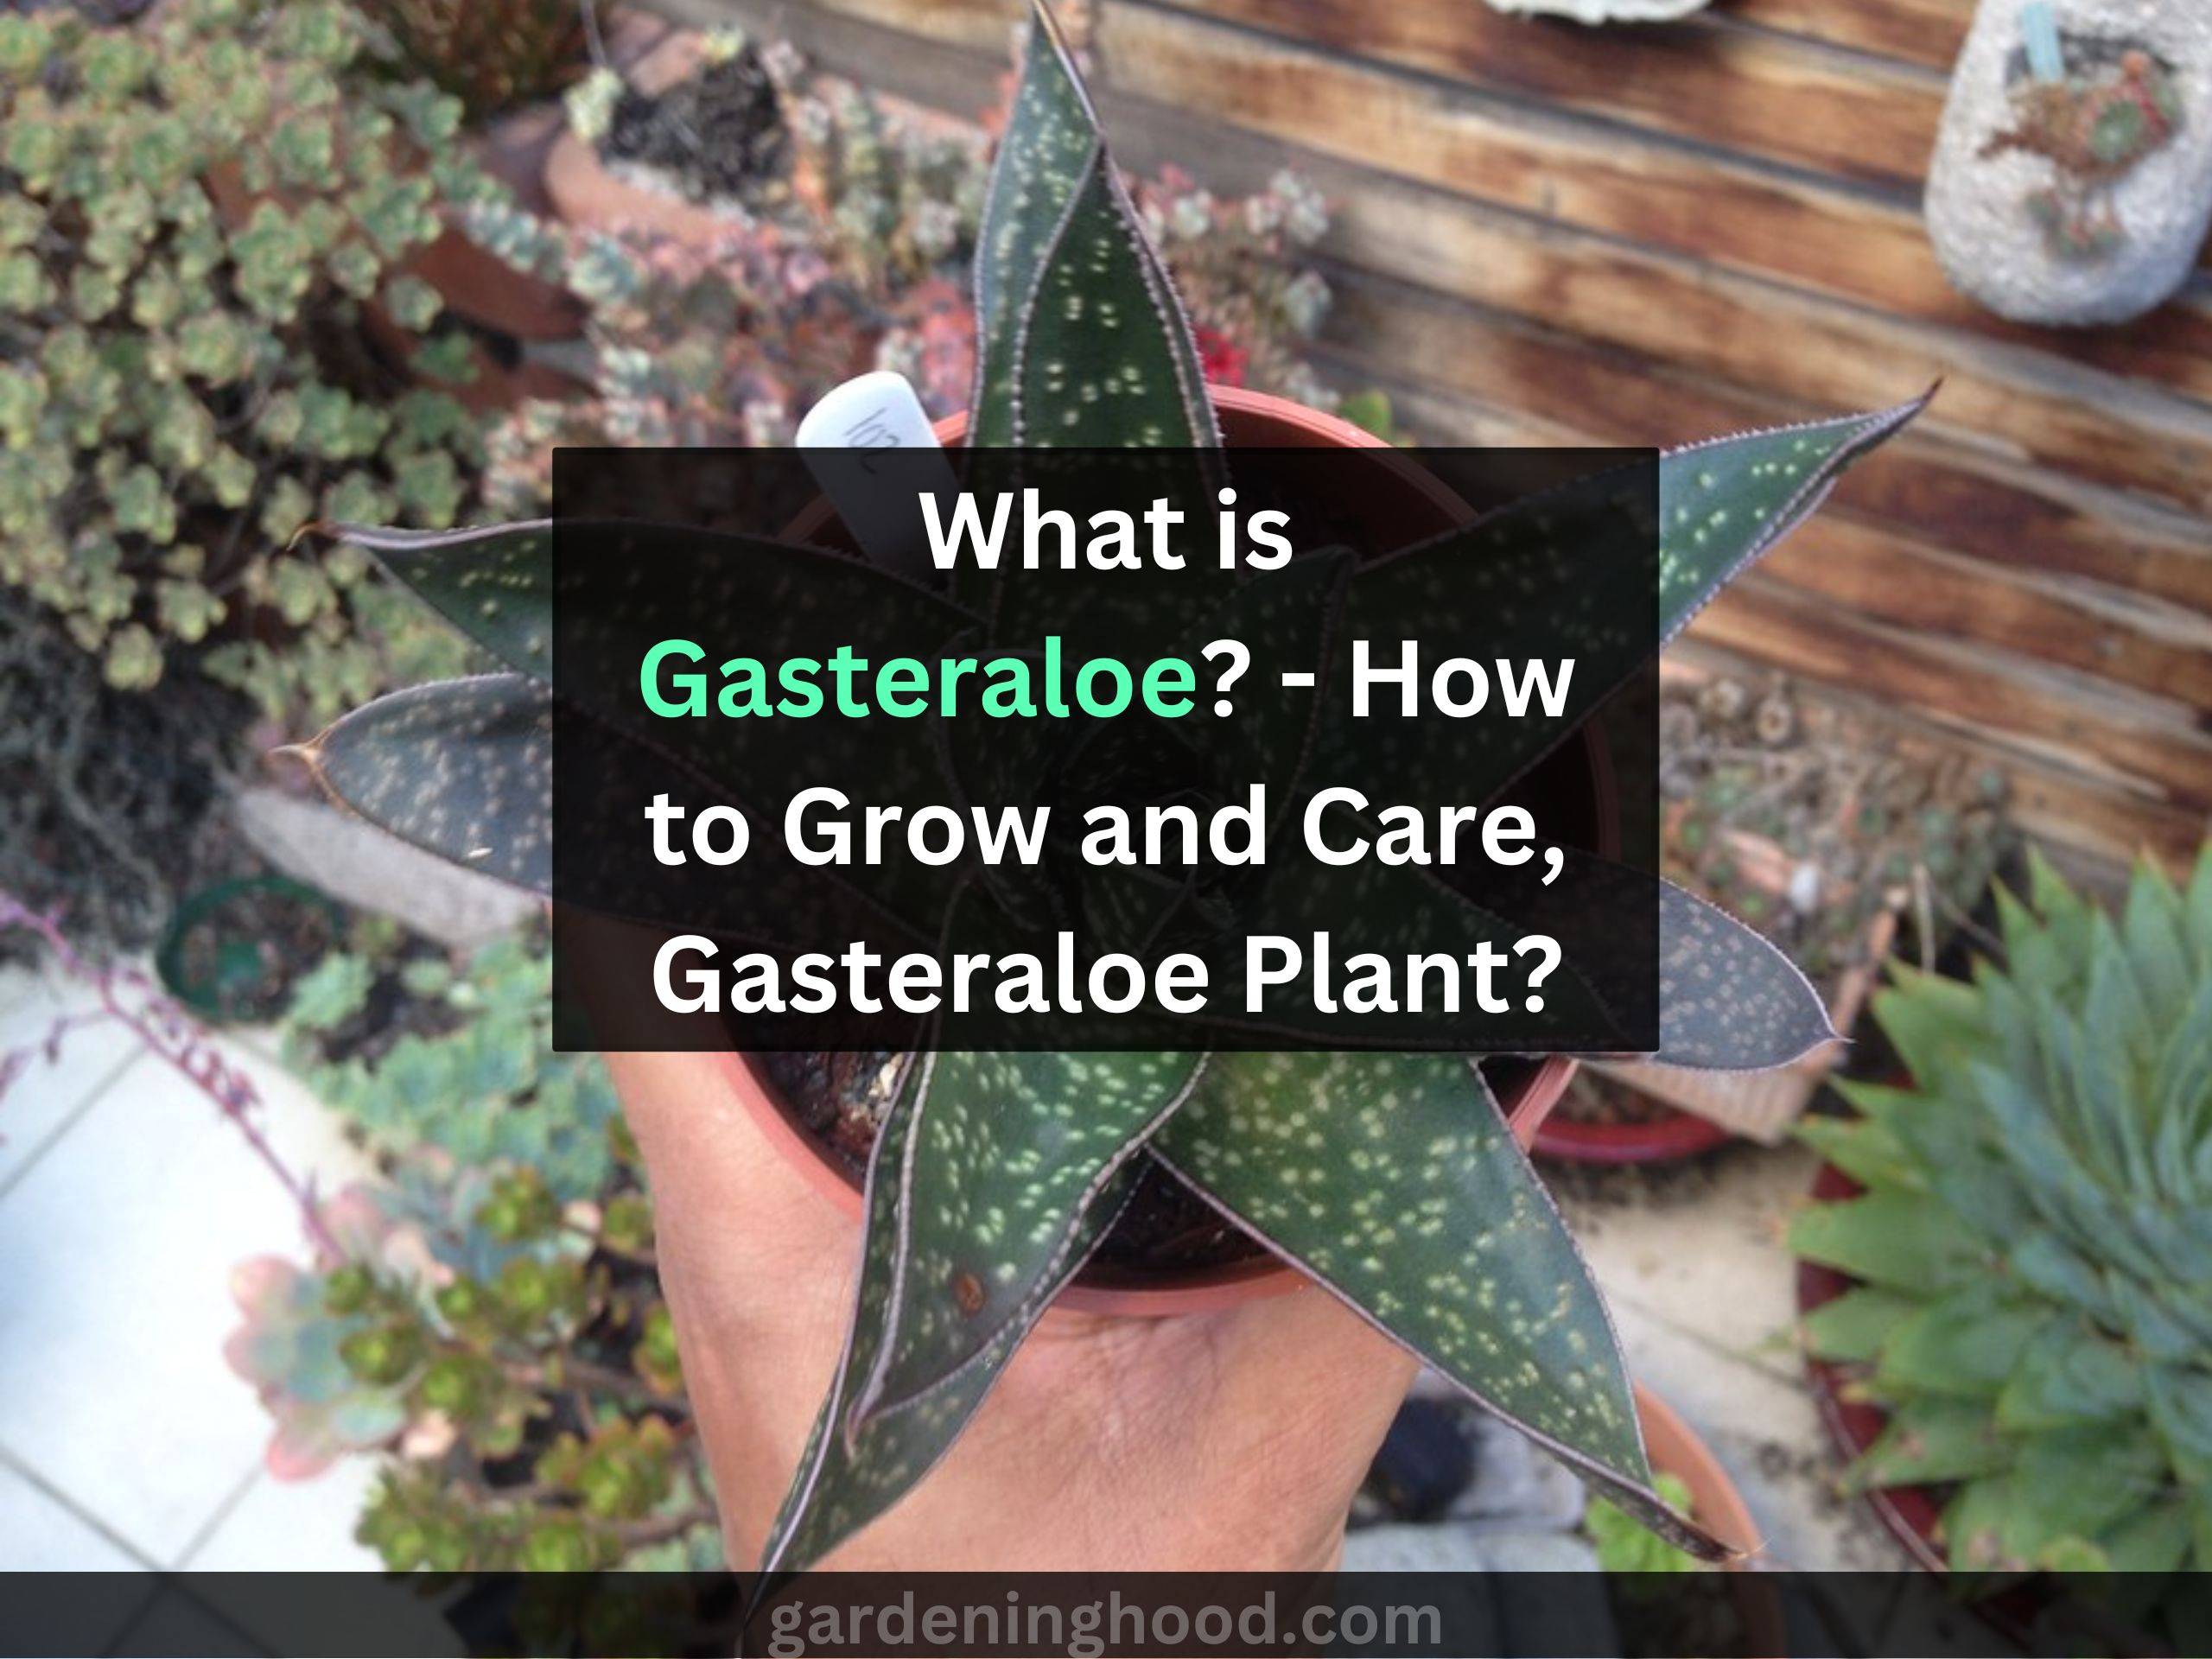 What is Gasteraloe? - How to Grow and Care, Gasteraloe Plant?